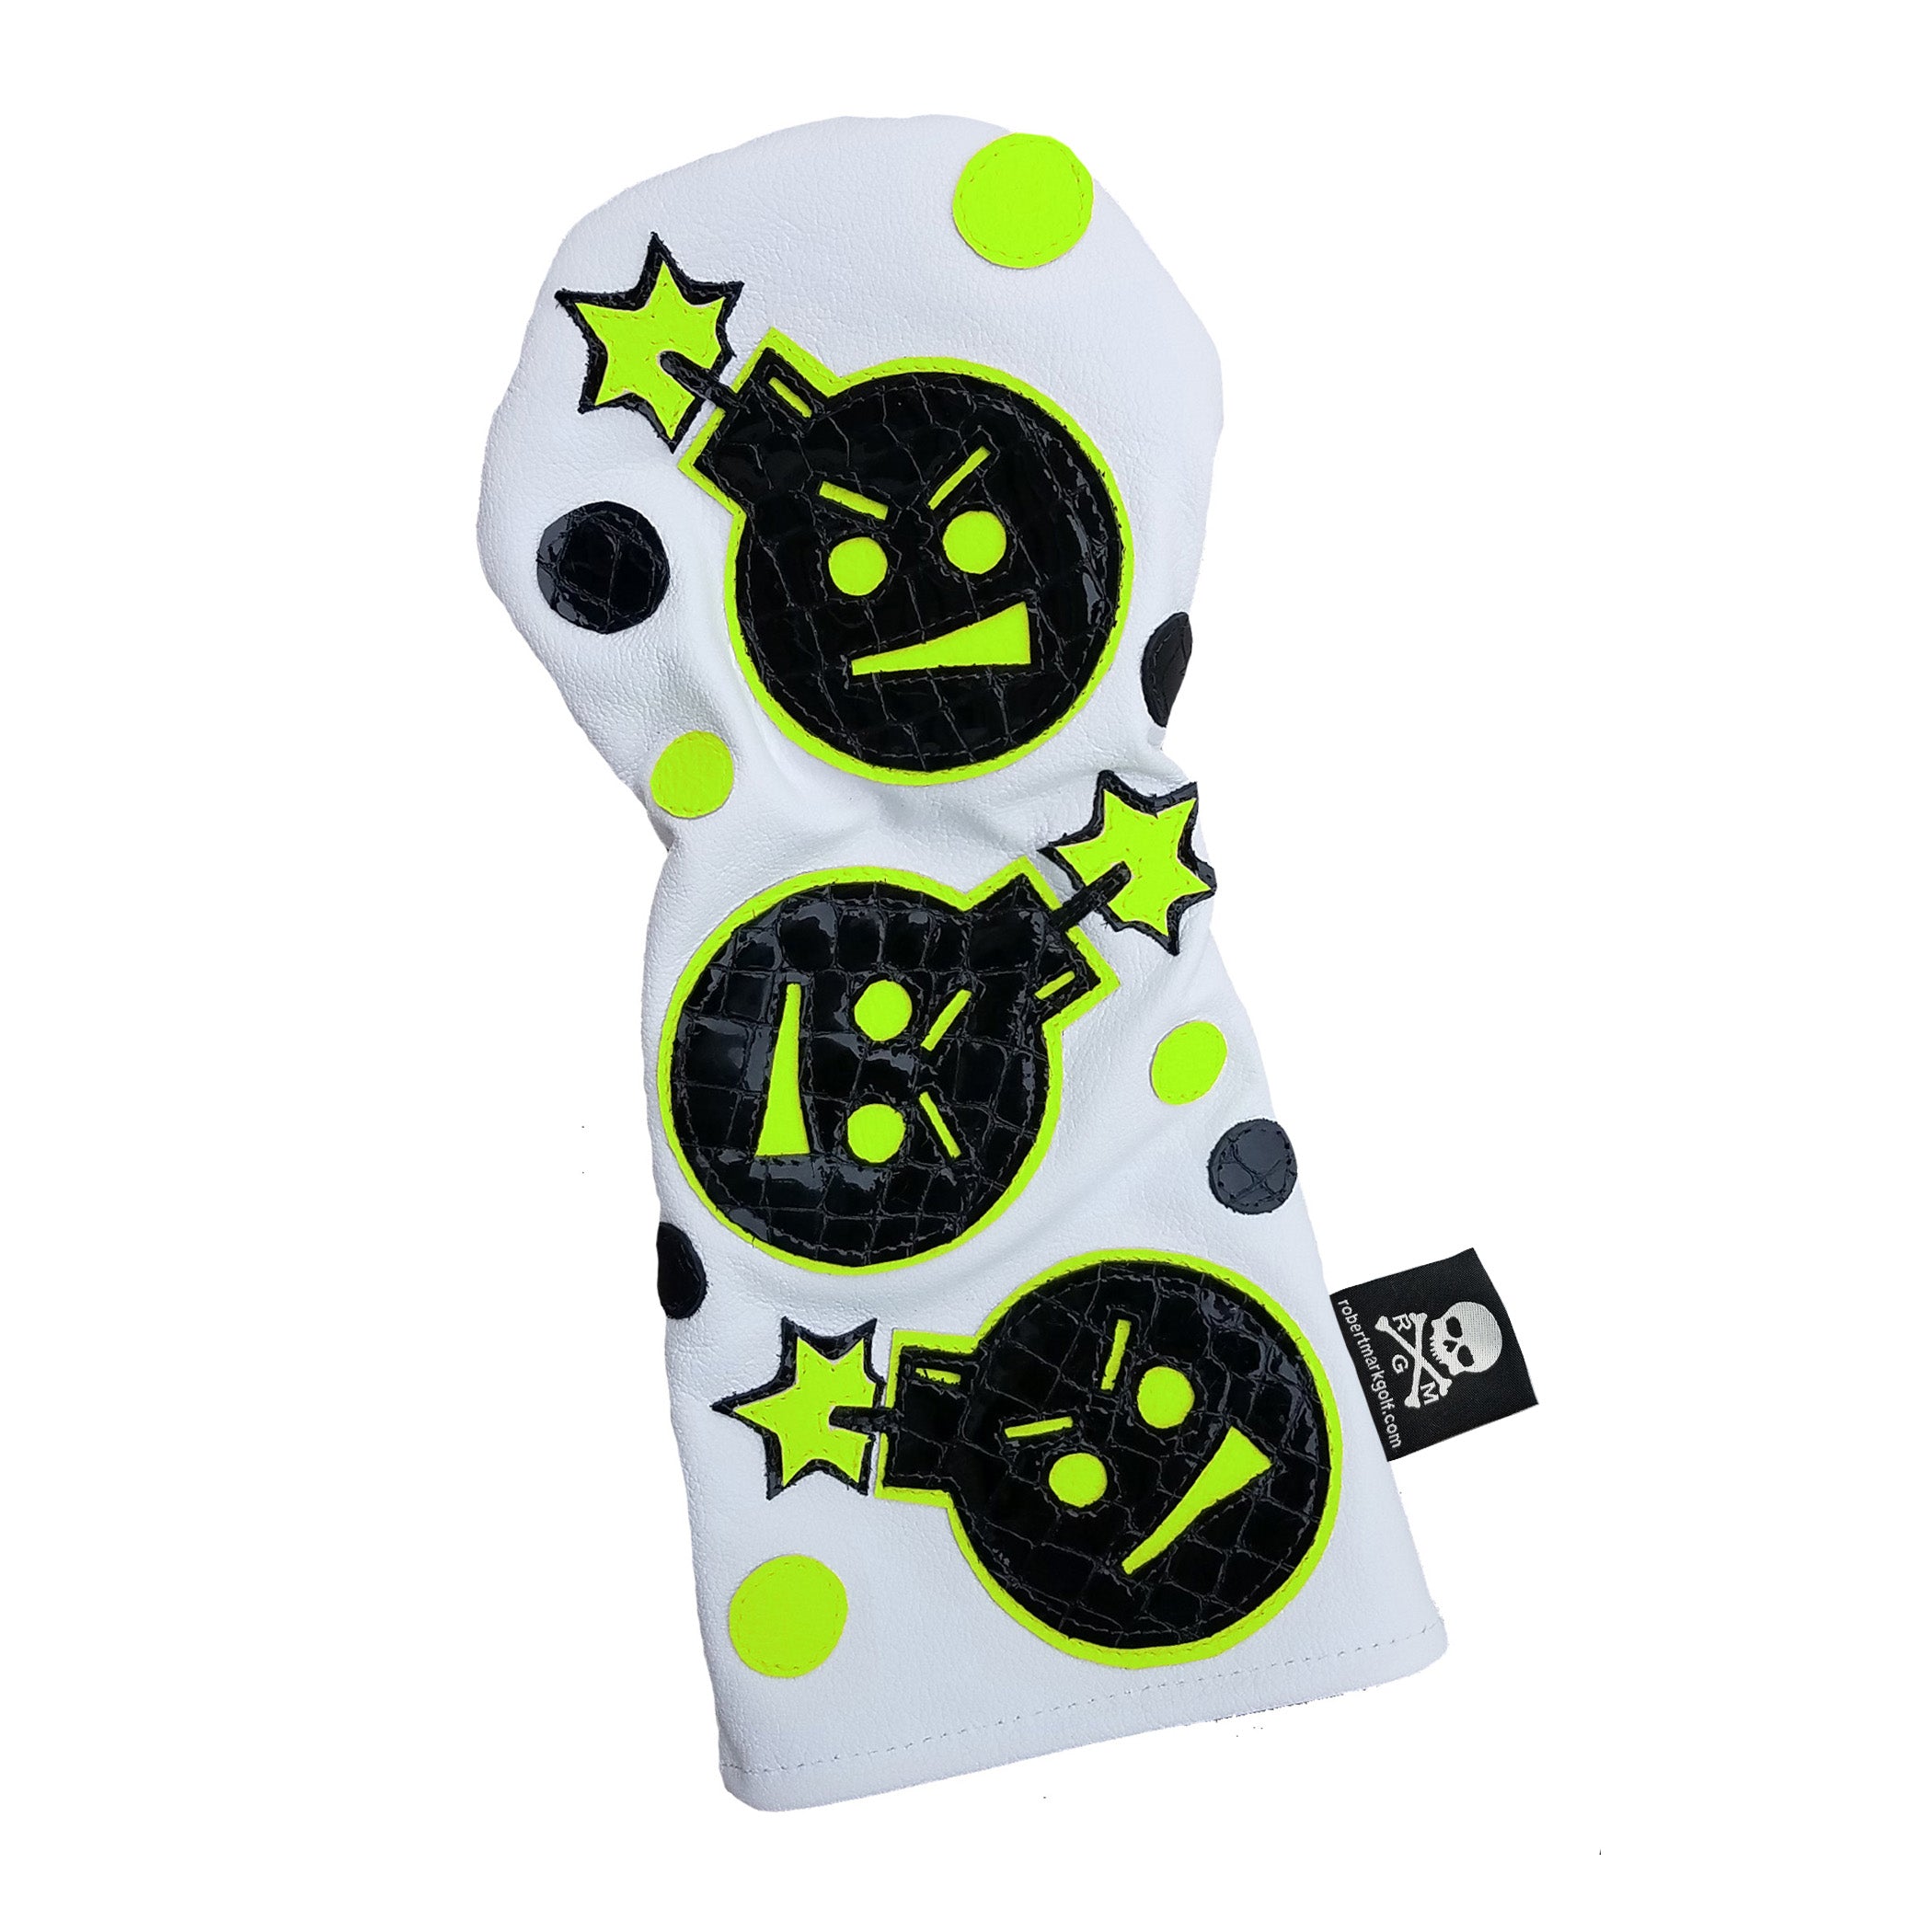 The Dancing "Angry Bomb" Driver Headcover - Robert Mark Golf